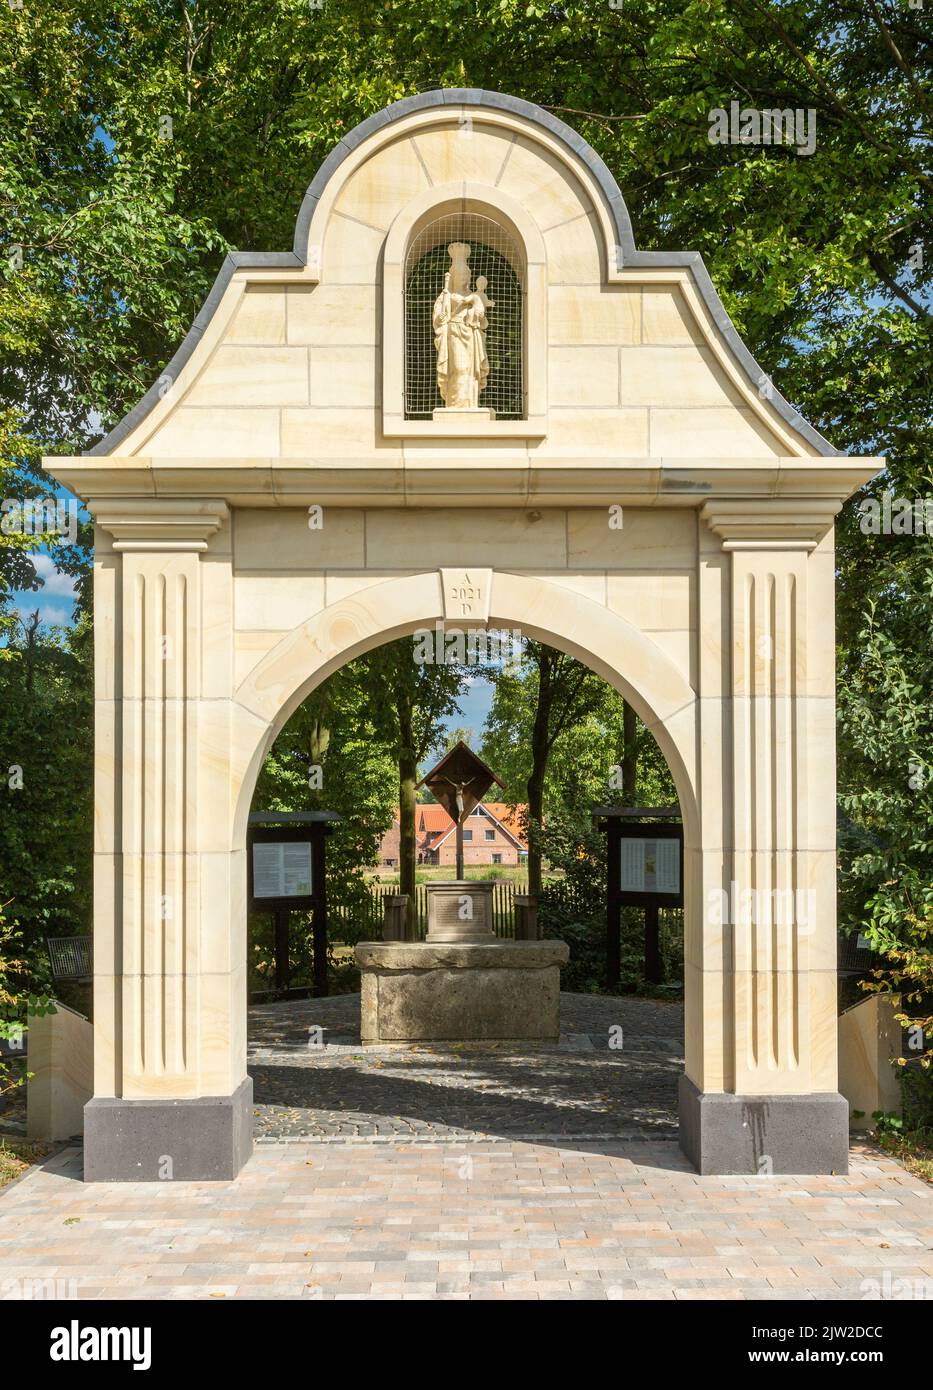 Germany, Rosendahl, Baumberge, Westmuensterland, Muensterland, Westphalia, North Rhine-Westphalia, NRW, Rosendahl-Osterwick, Rosendahl Cross, memorial to the former Trappists monastery, archway, view to the cross Stock Photo